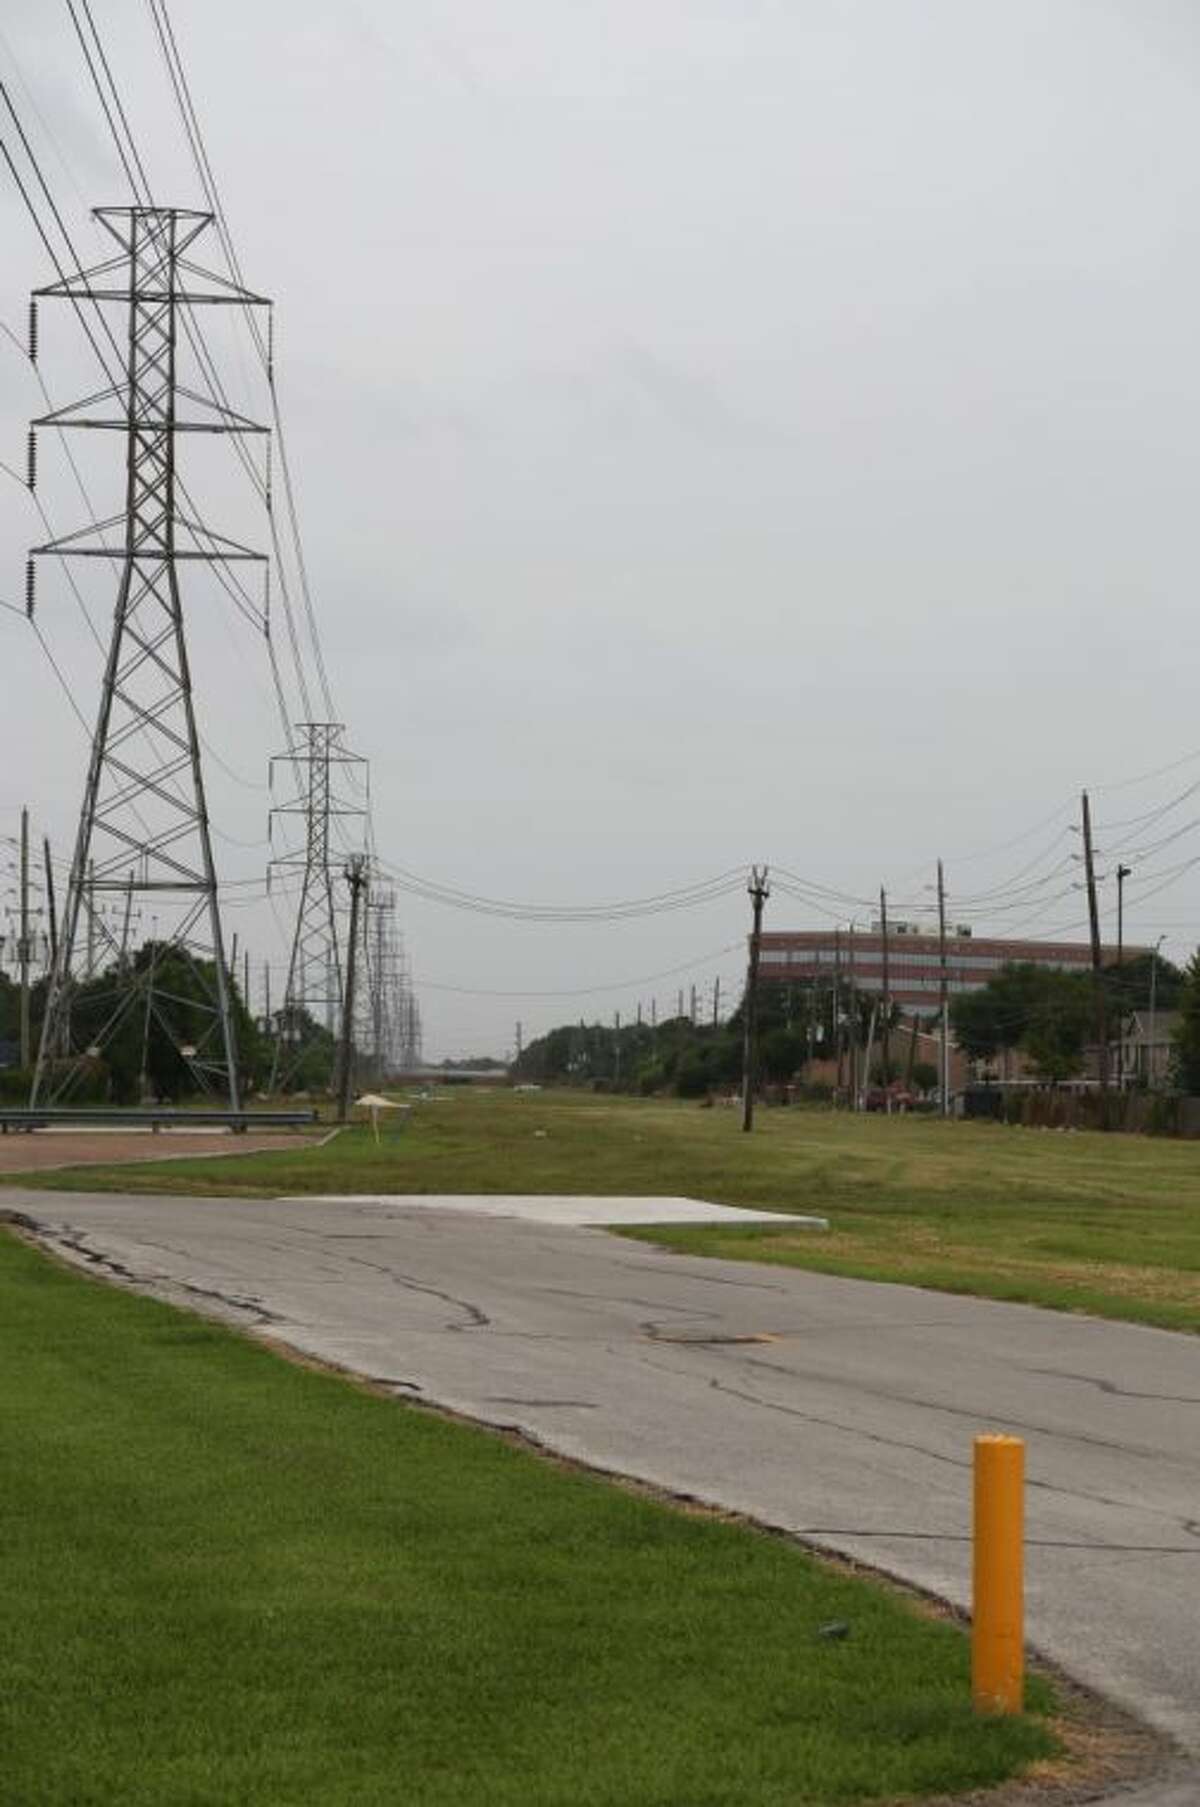 The Westchase District is negotiating with CenterPoint to put a hike and bike trail on this corridor. This view is looking south from near Westheimer toward Richmond.